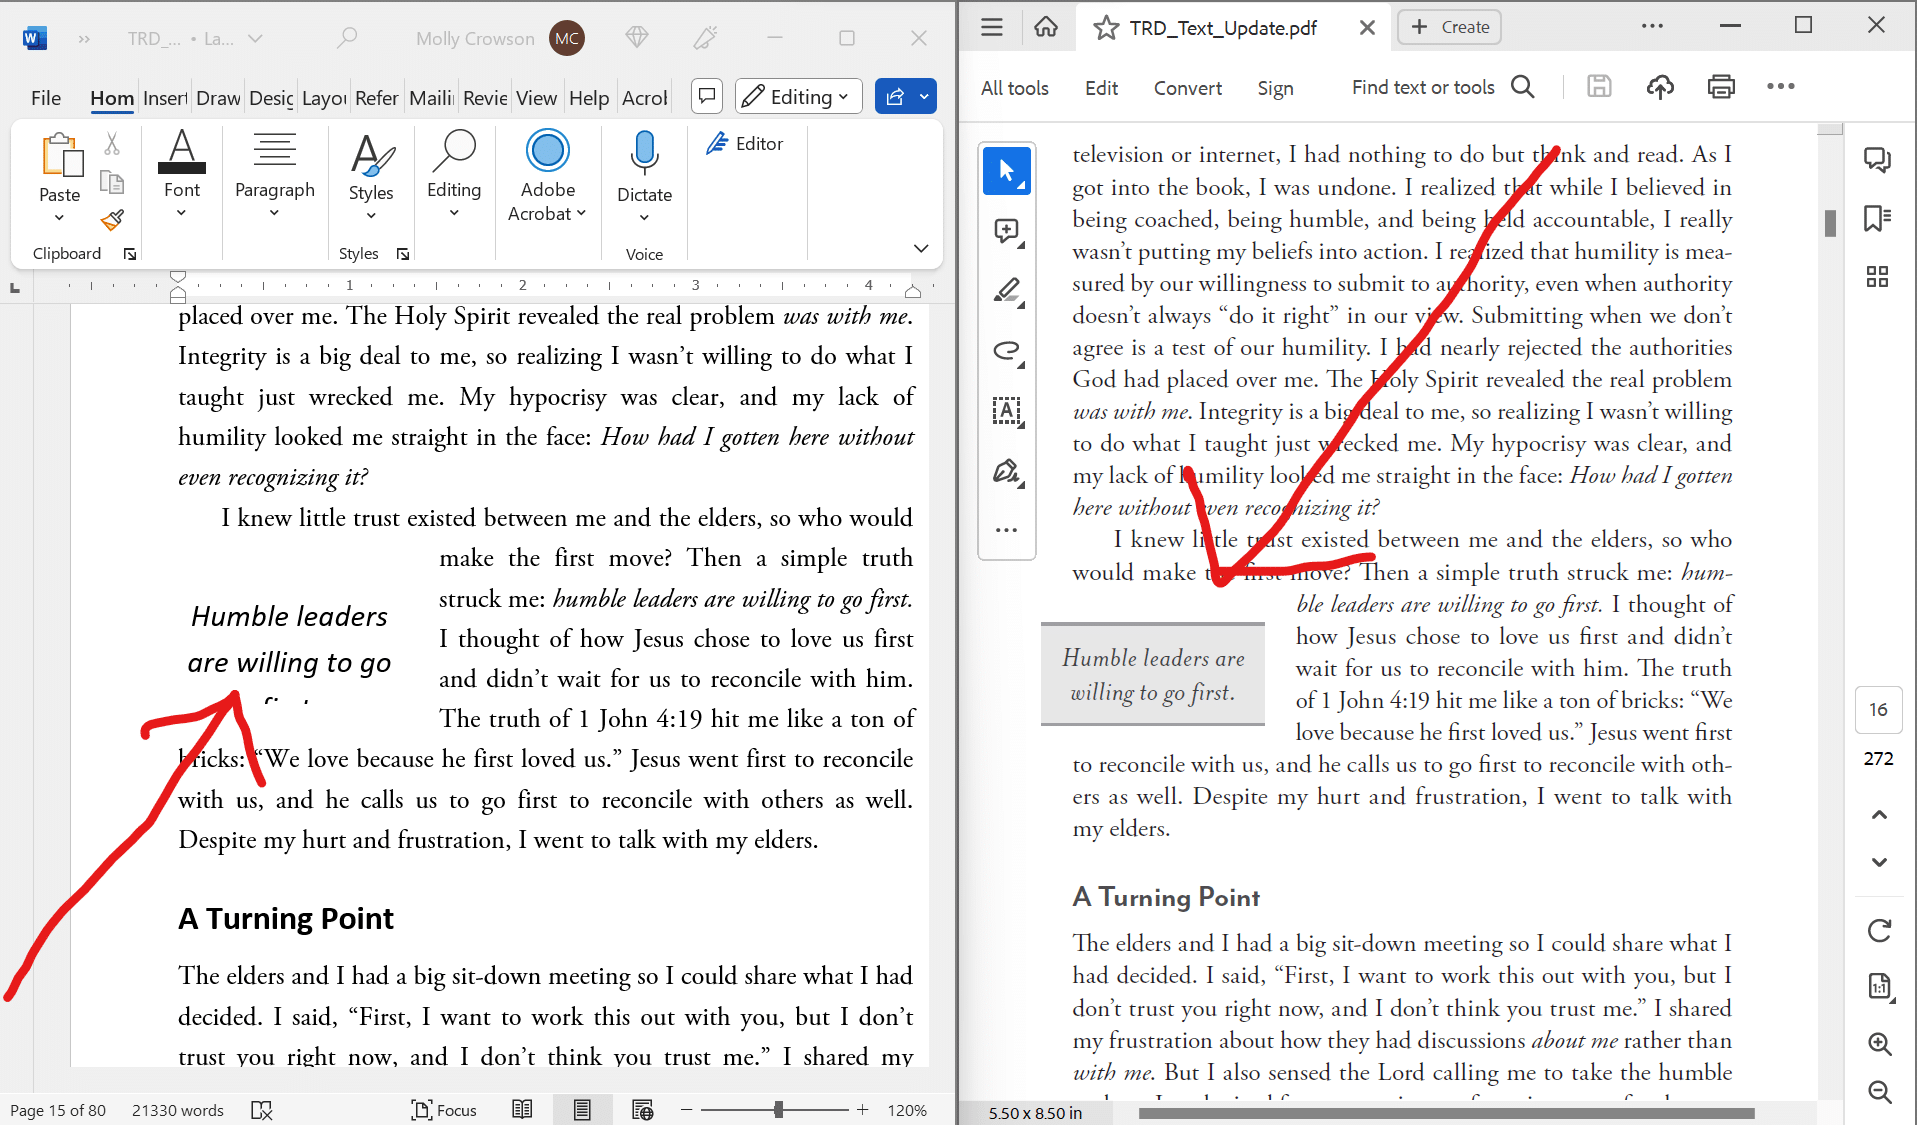 The callout is cut off on the WordsFlow file, but it is formatted correctly on the PDF.